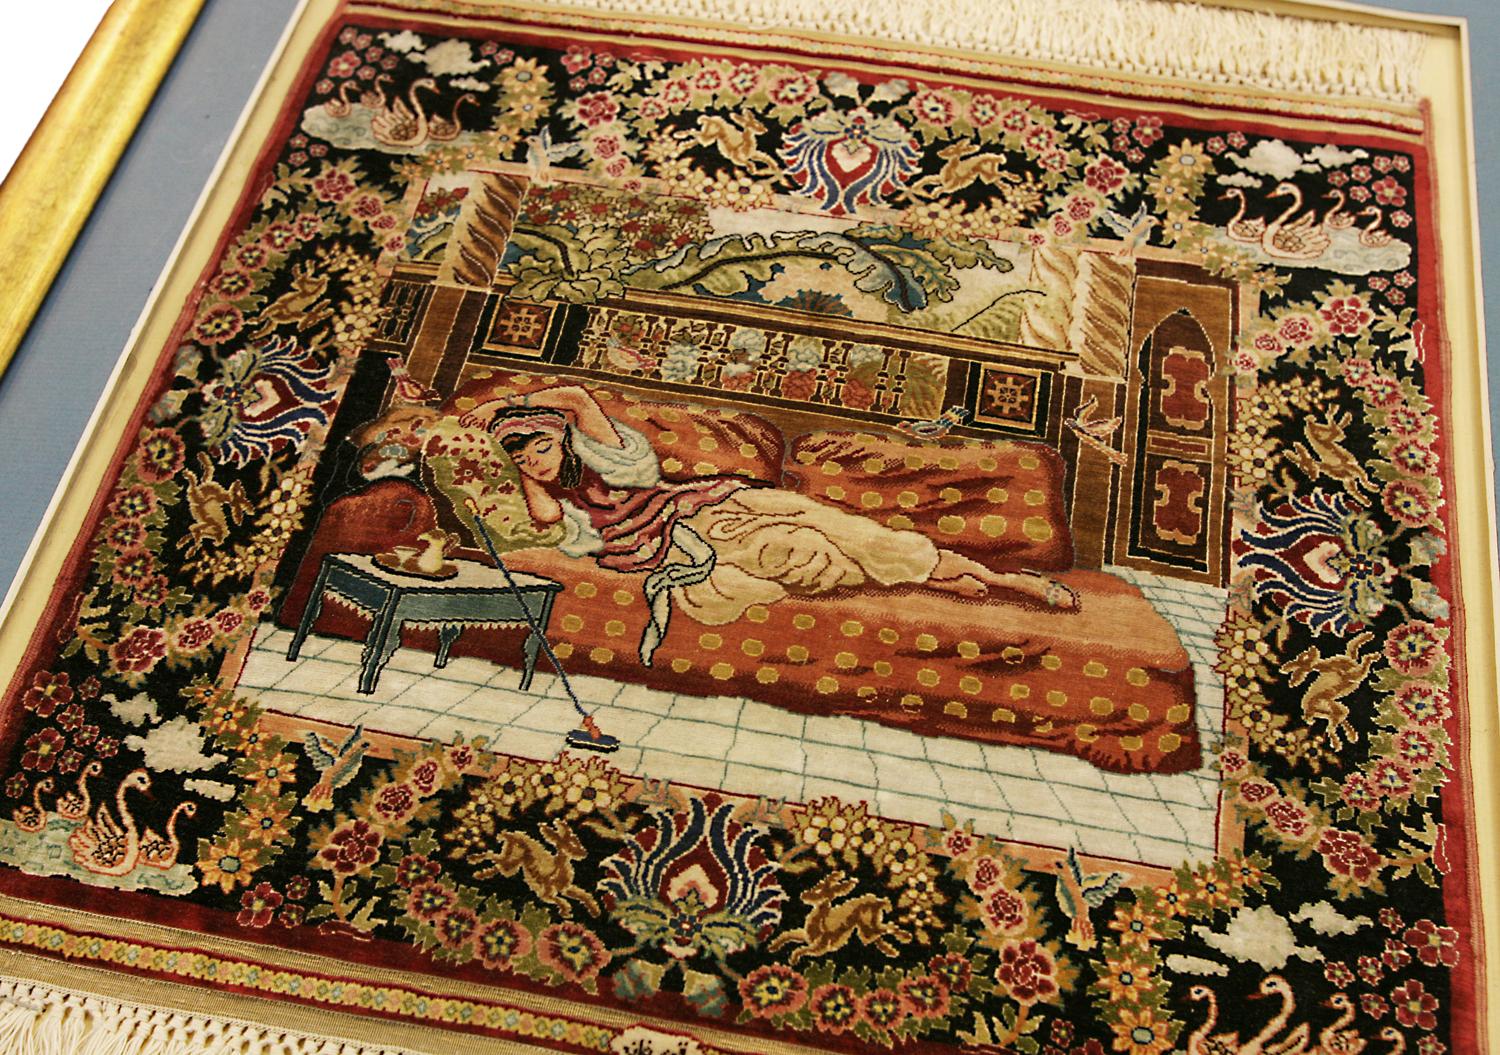 Other Turkish Hereke Lady Resting On a Chaise Lounge Couch Design Silk Rug, 1970-2000 For Sale